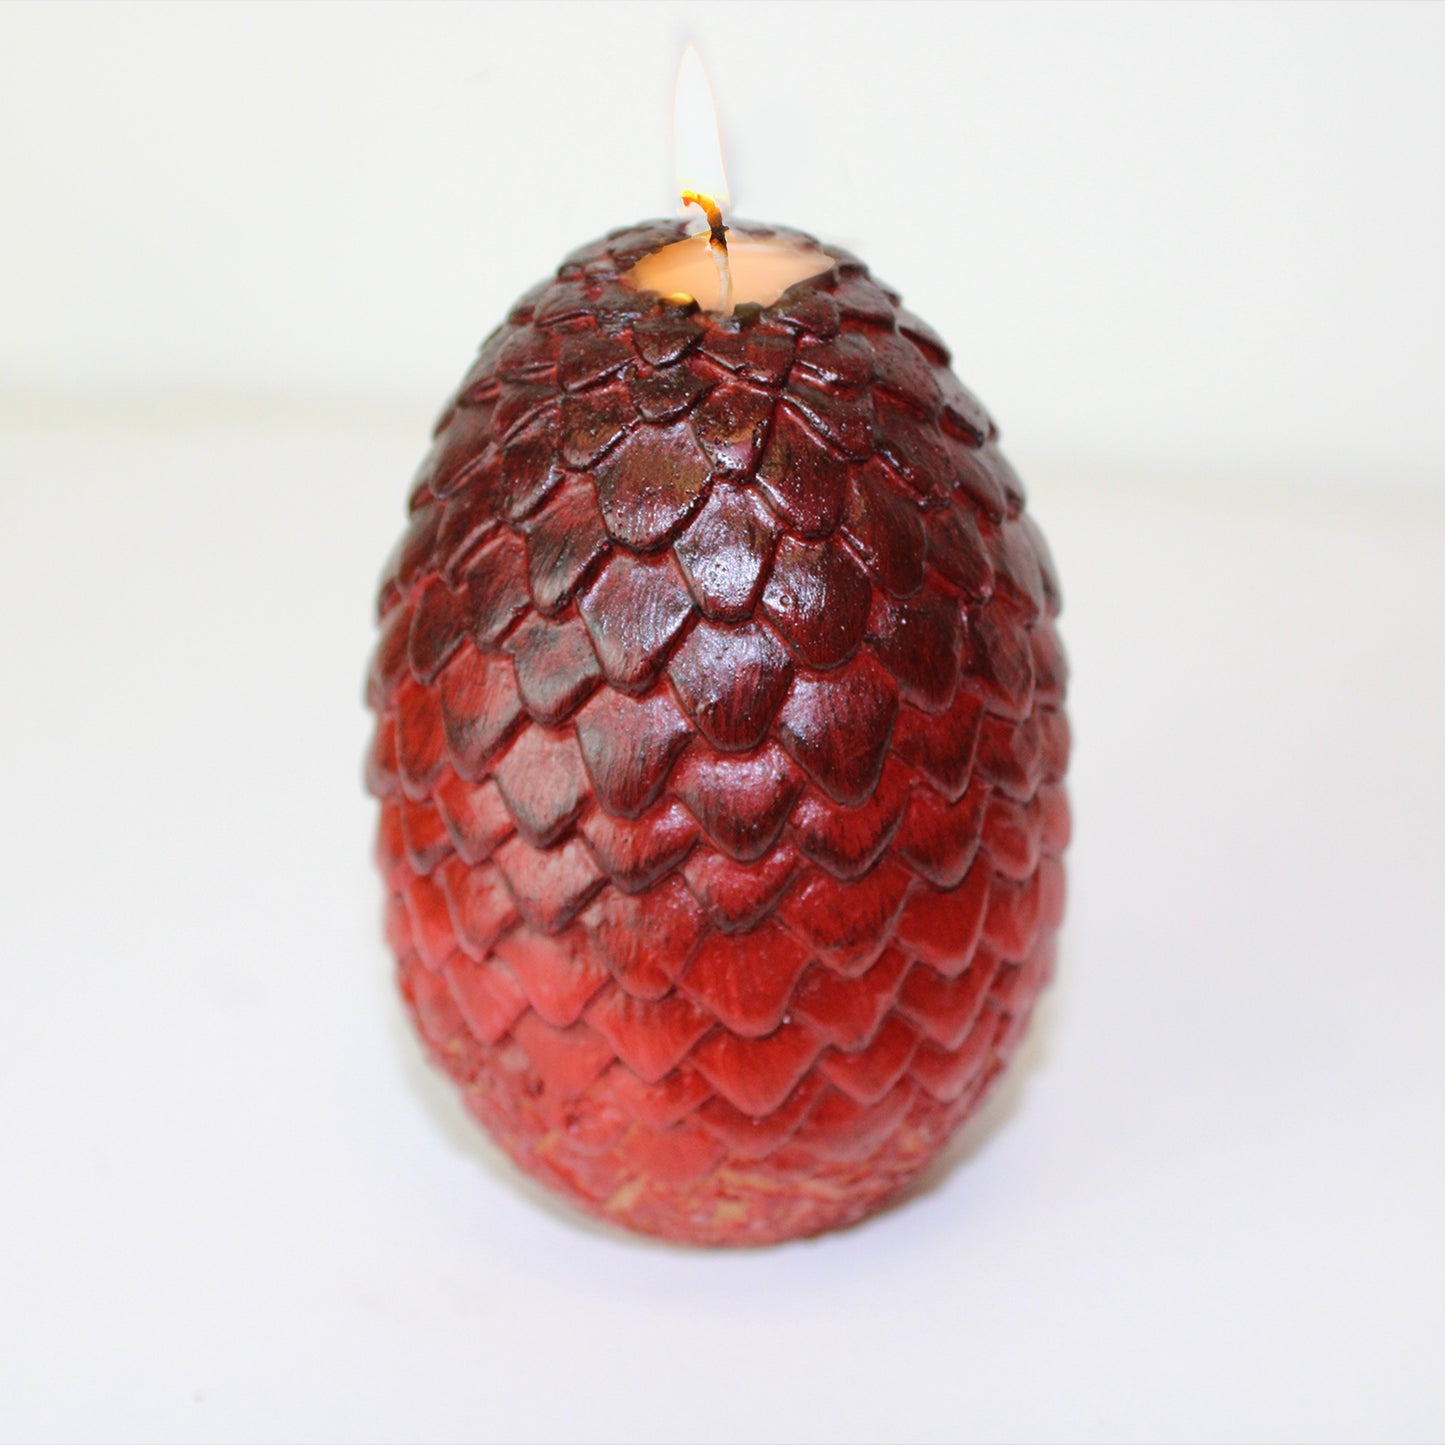 Game of Thrones Sculpted Dragon Egg Candle